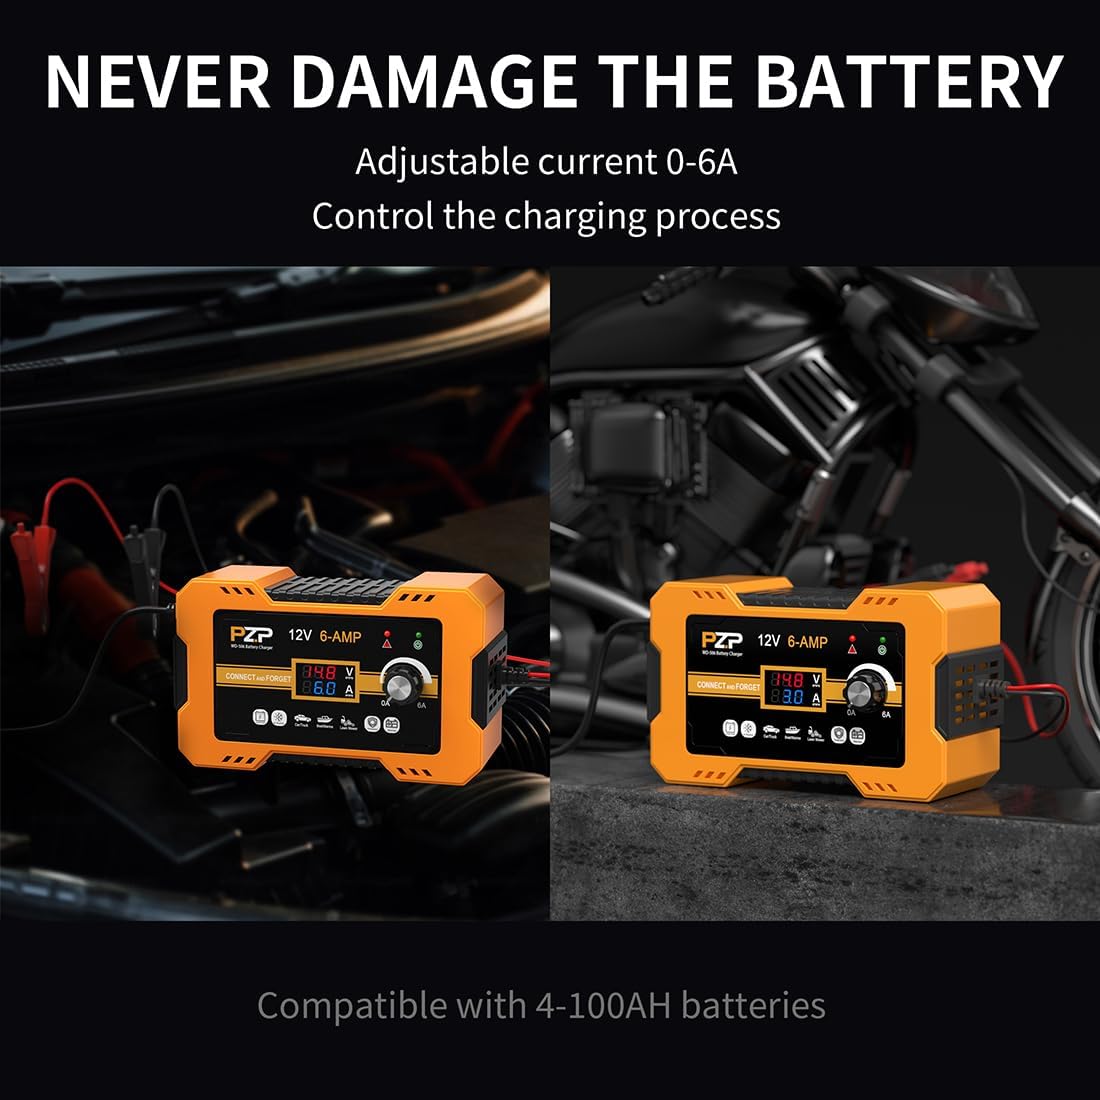 PZP 12V 6A Manual Battery Charger Automotive 12 Volt Car Marine Auto Lawn Mower ATV 6-Amp Trickle Charger for Boat Motorcycle AGM Deep Cycle 0-6A Battery Maintainer - PZP 12V 6A Manual Battery Charger Review